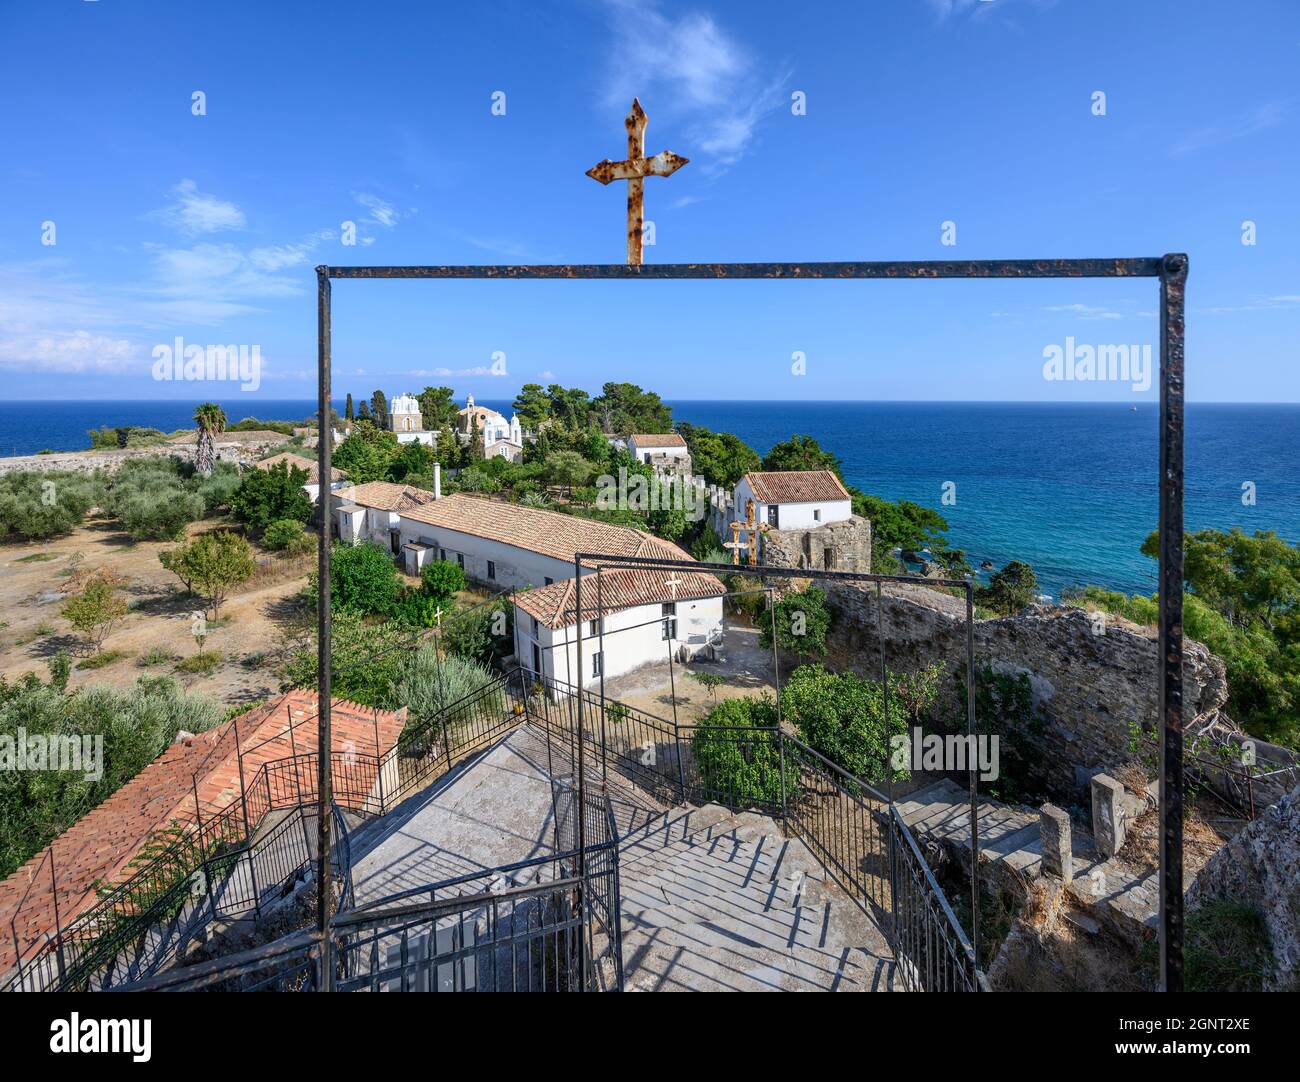 Agios Ioannis High Resolution Stock Photography and Images - Alamy